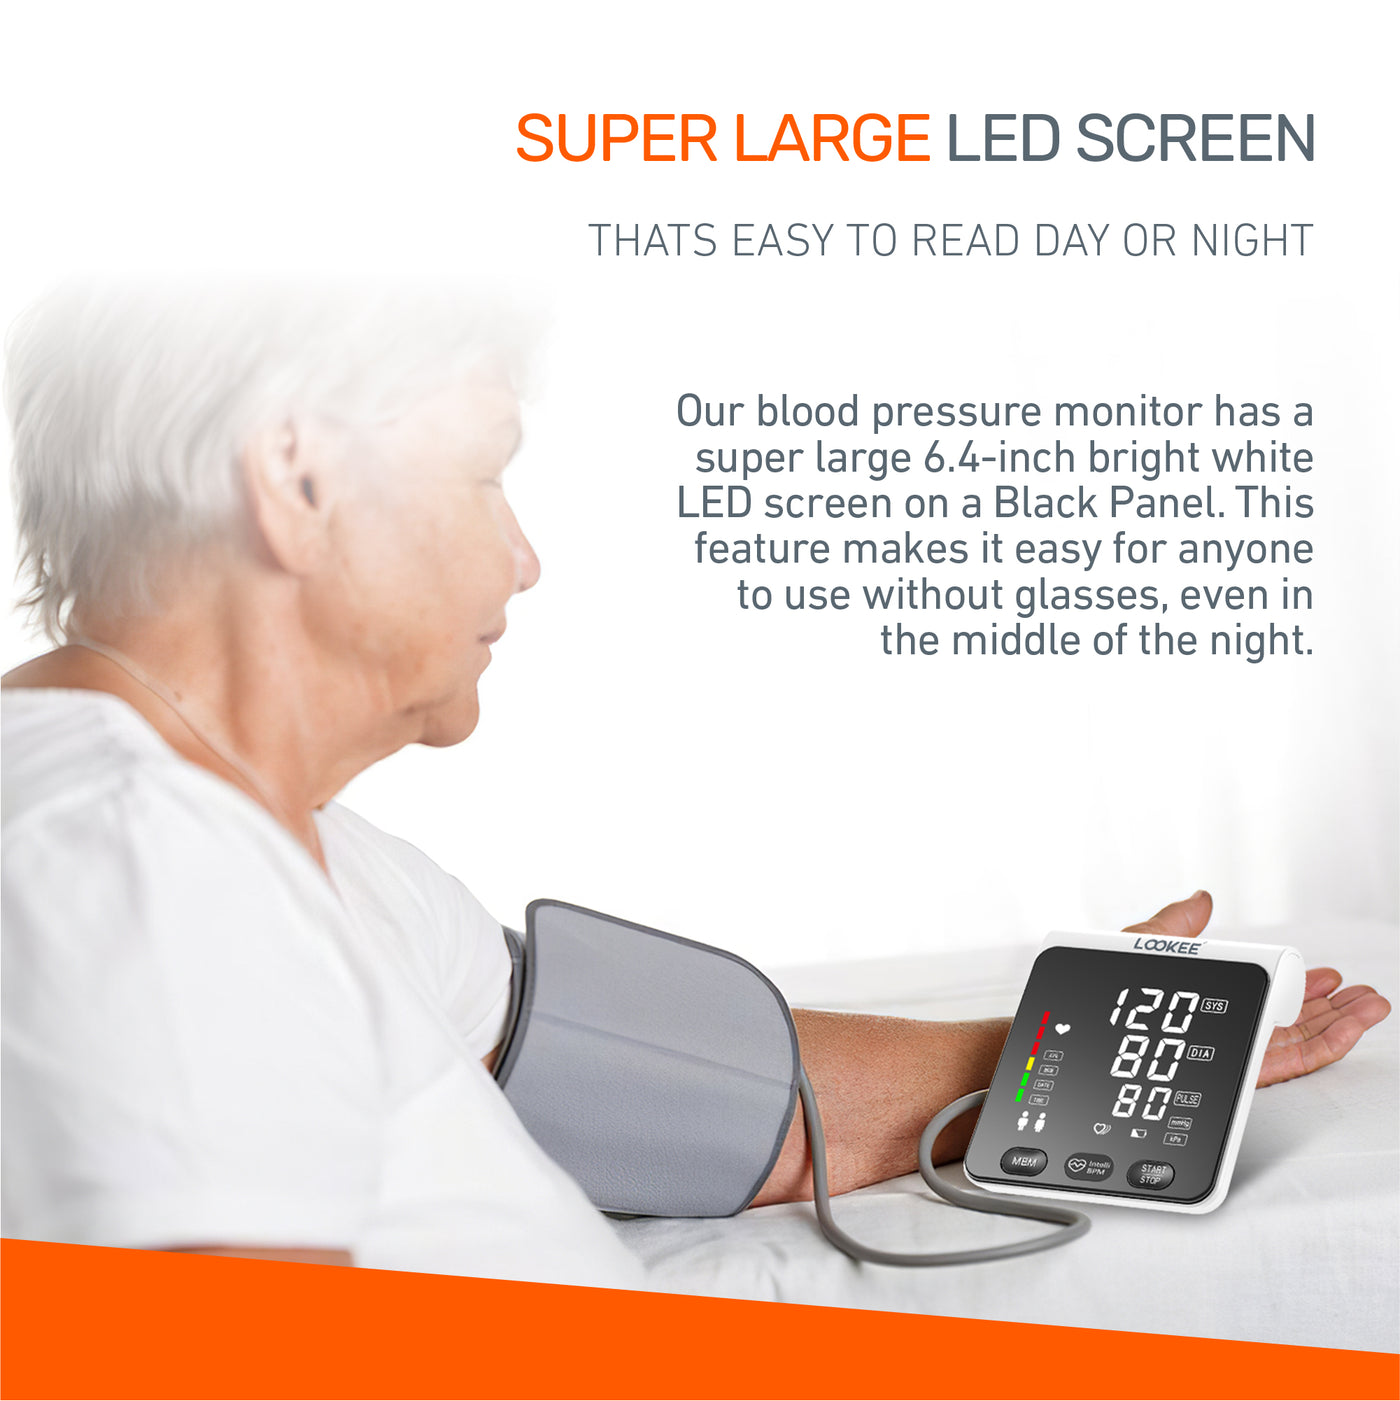 LOOKEE® A2 Premium LED Automatic Upper Arm Blood Pressure Monitor | BP Machine for Home Use | Large Genuine 6.4" LED Panel | Memories for Two Users